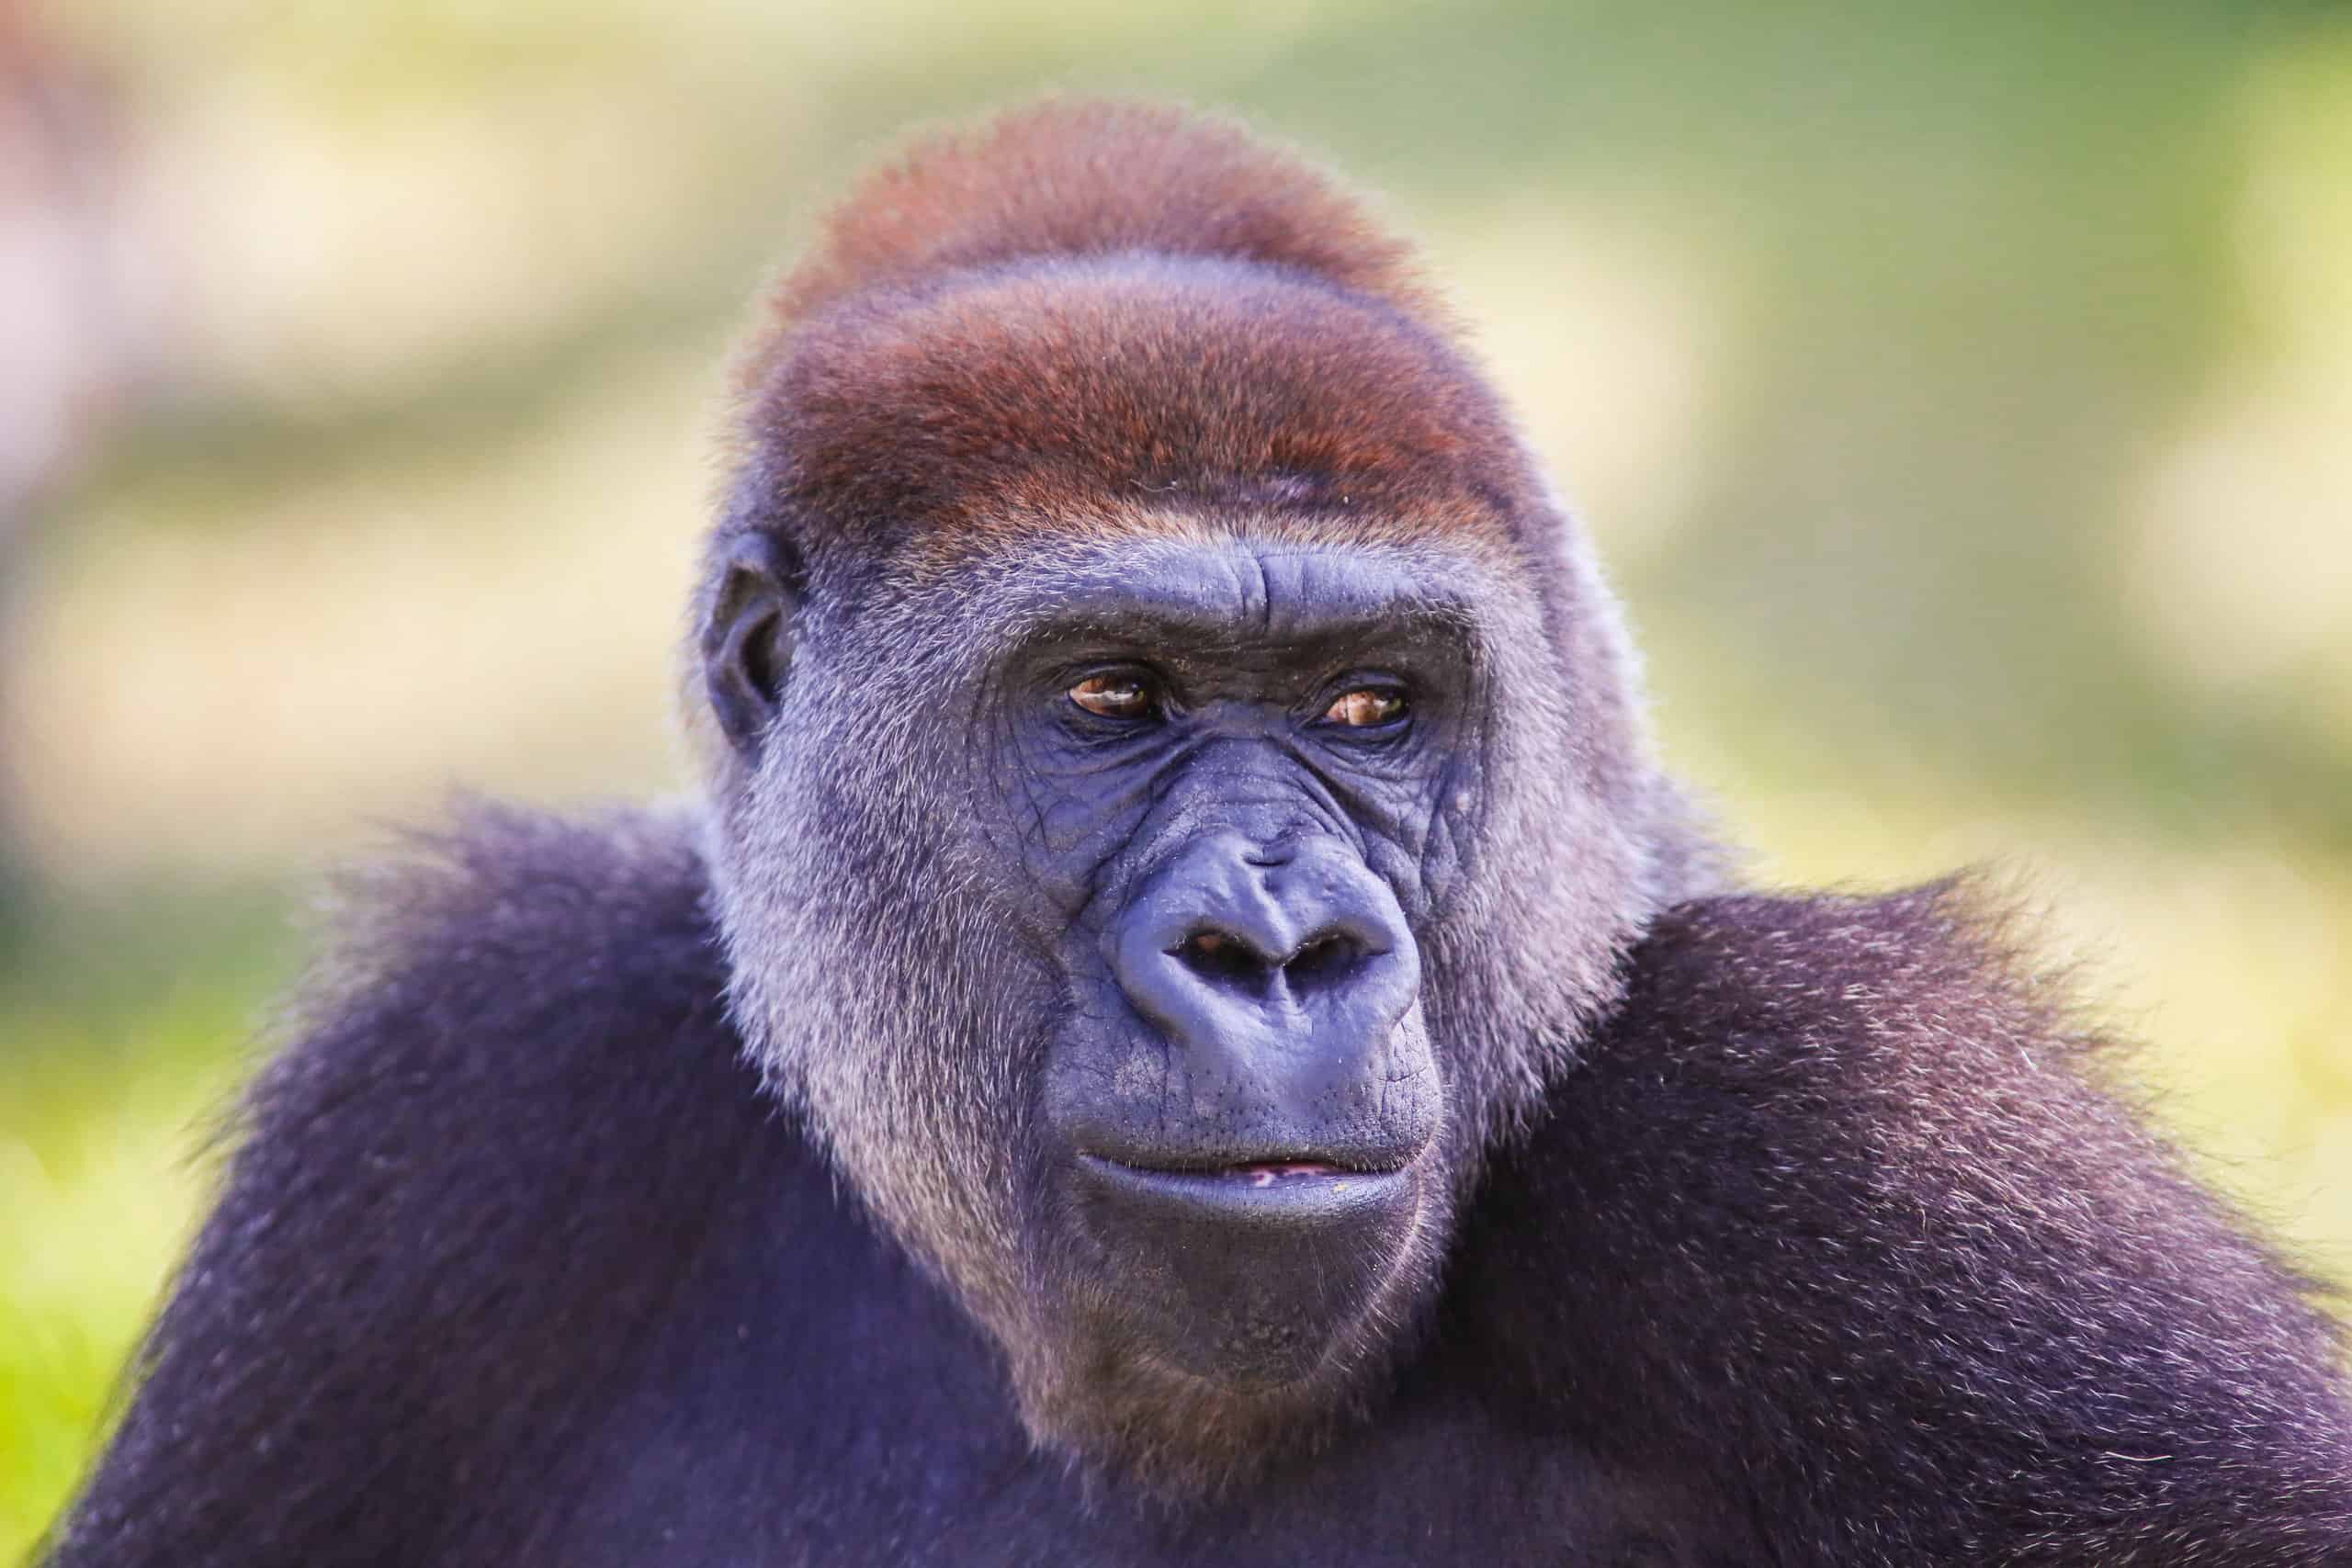 ful frame portrait of a gorilla. The gorilla is looking off the the right. It is mostly dark colors with light fur around its brow and cheeks. Indistinct wavy green and yellow background.